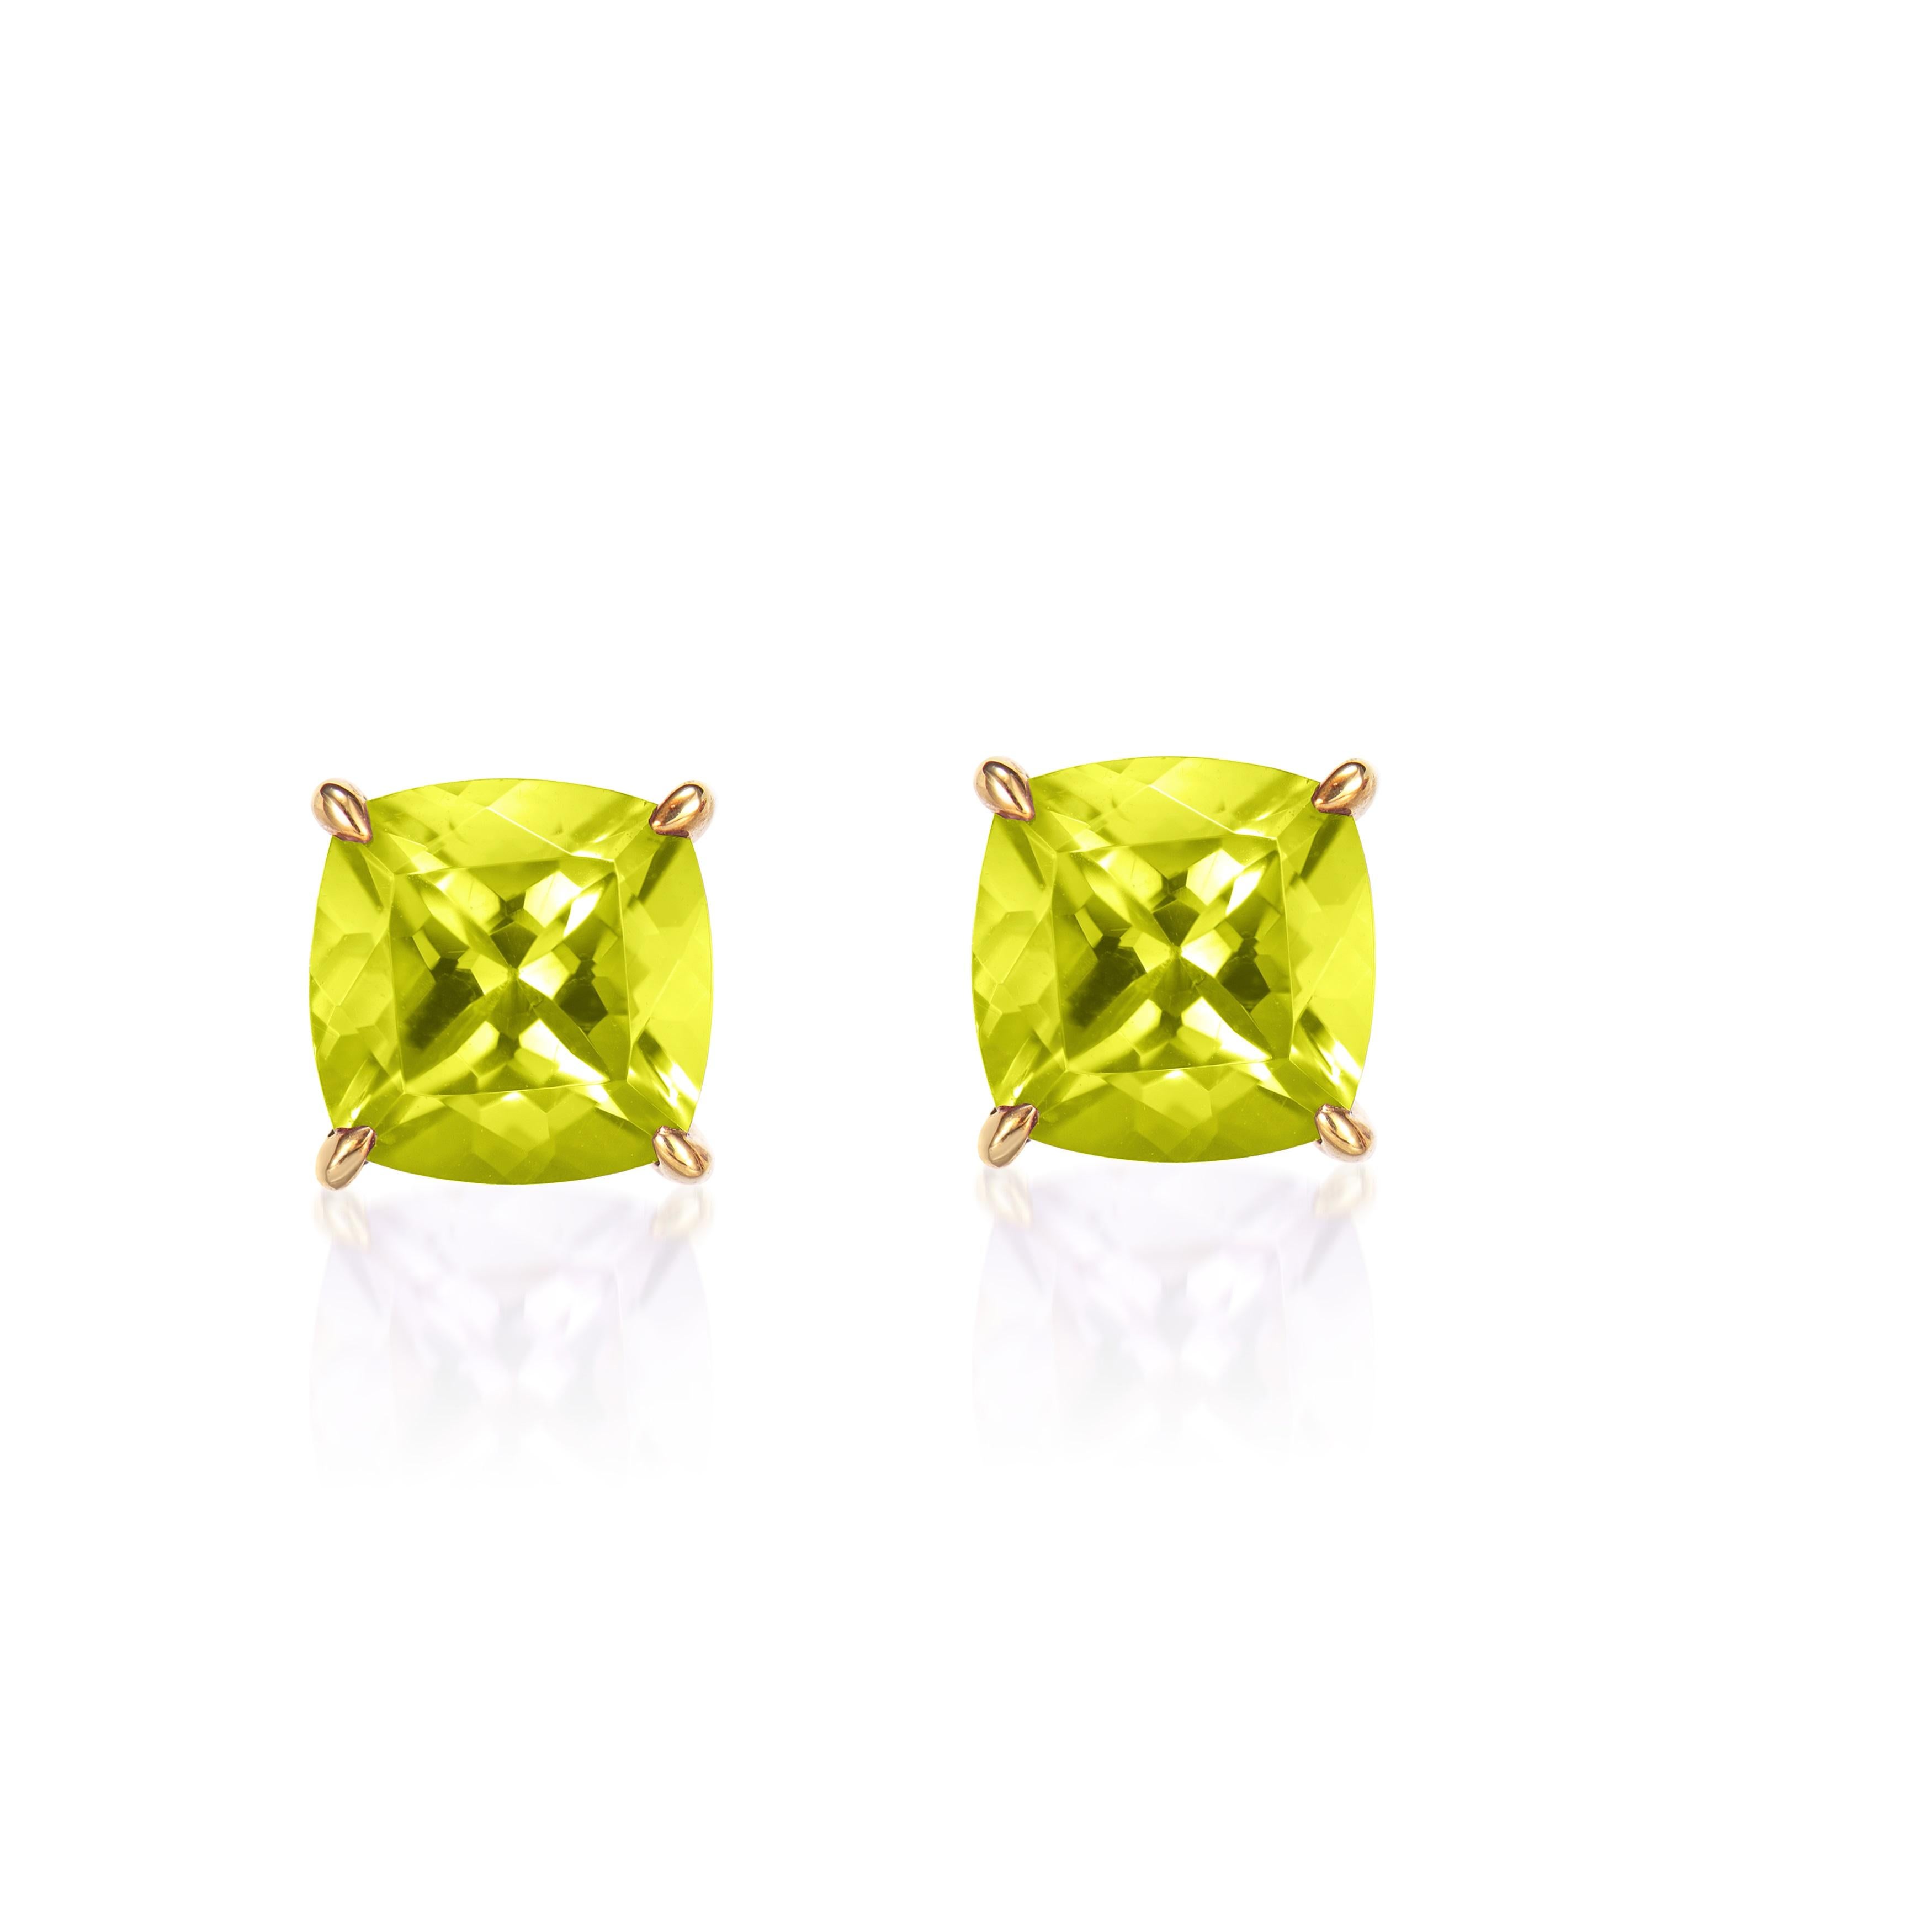 Contemporary 2.32 Carat Peridot Stud Earring in 18Karat Yellow Gold. For Sale